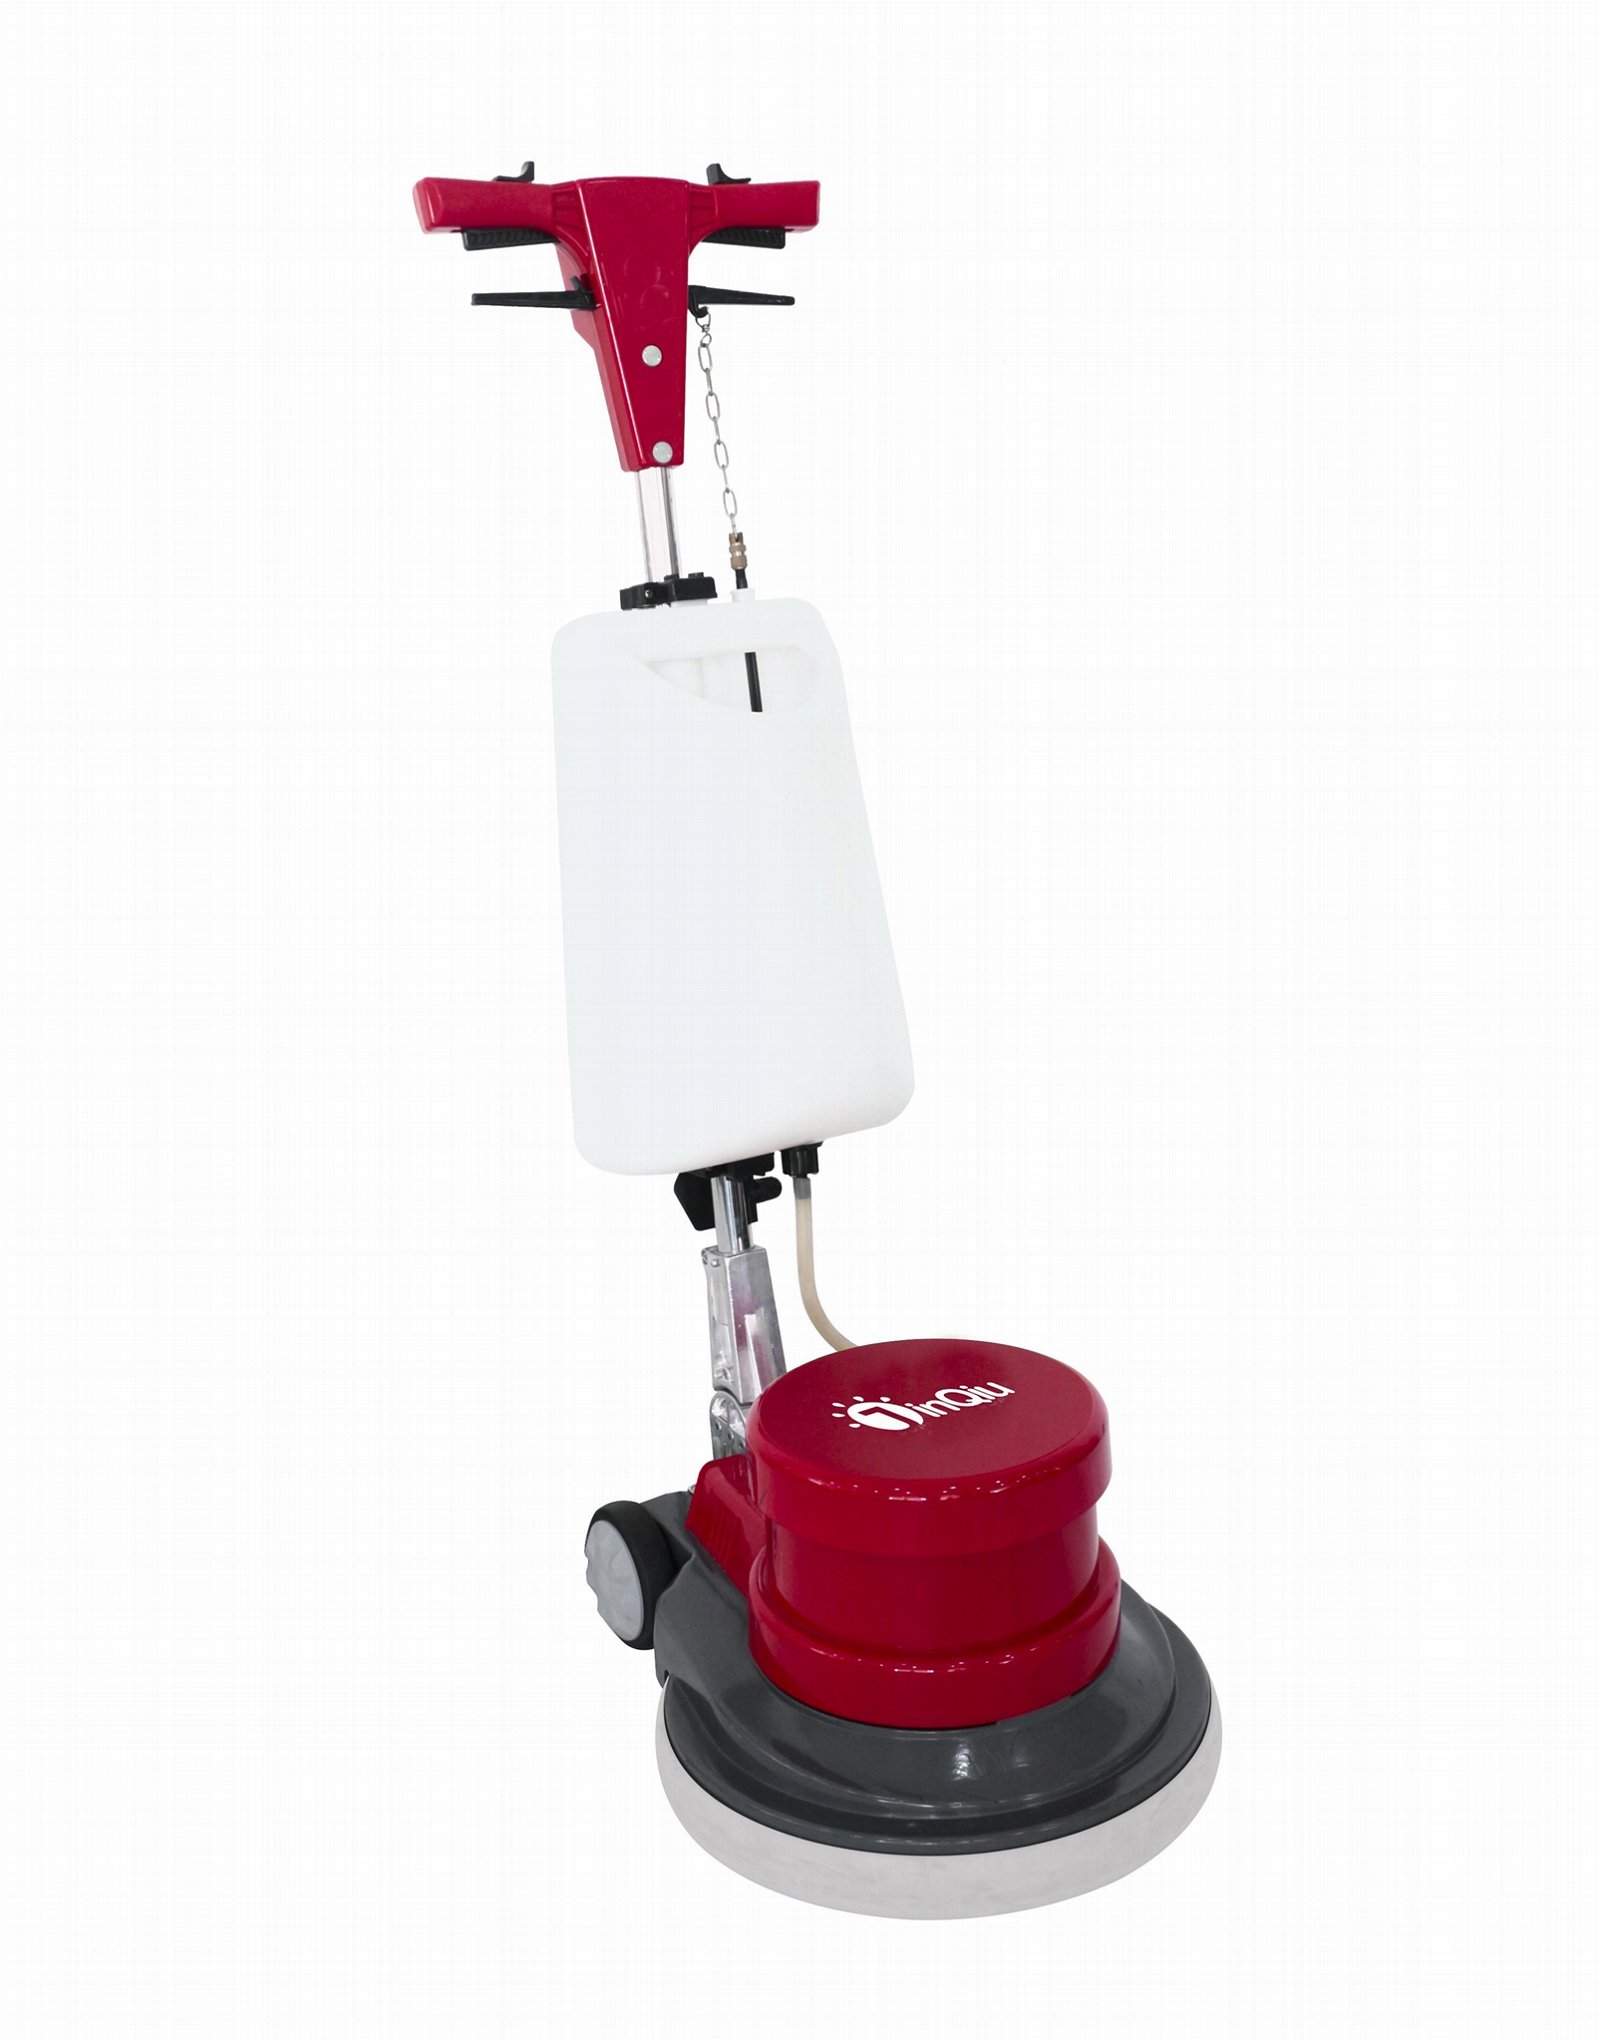 Bd1ae Floor Renewing and cleaning Machine  4